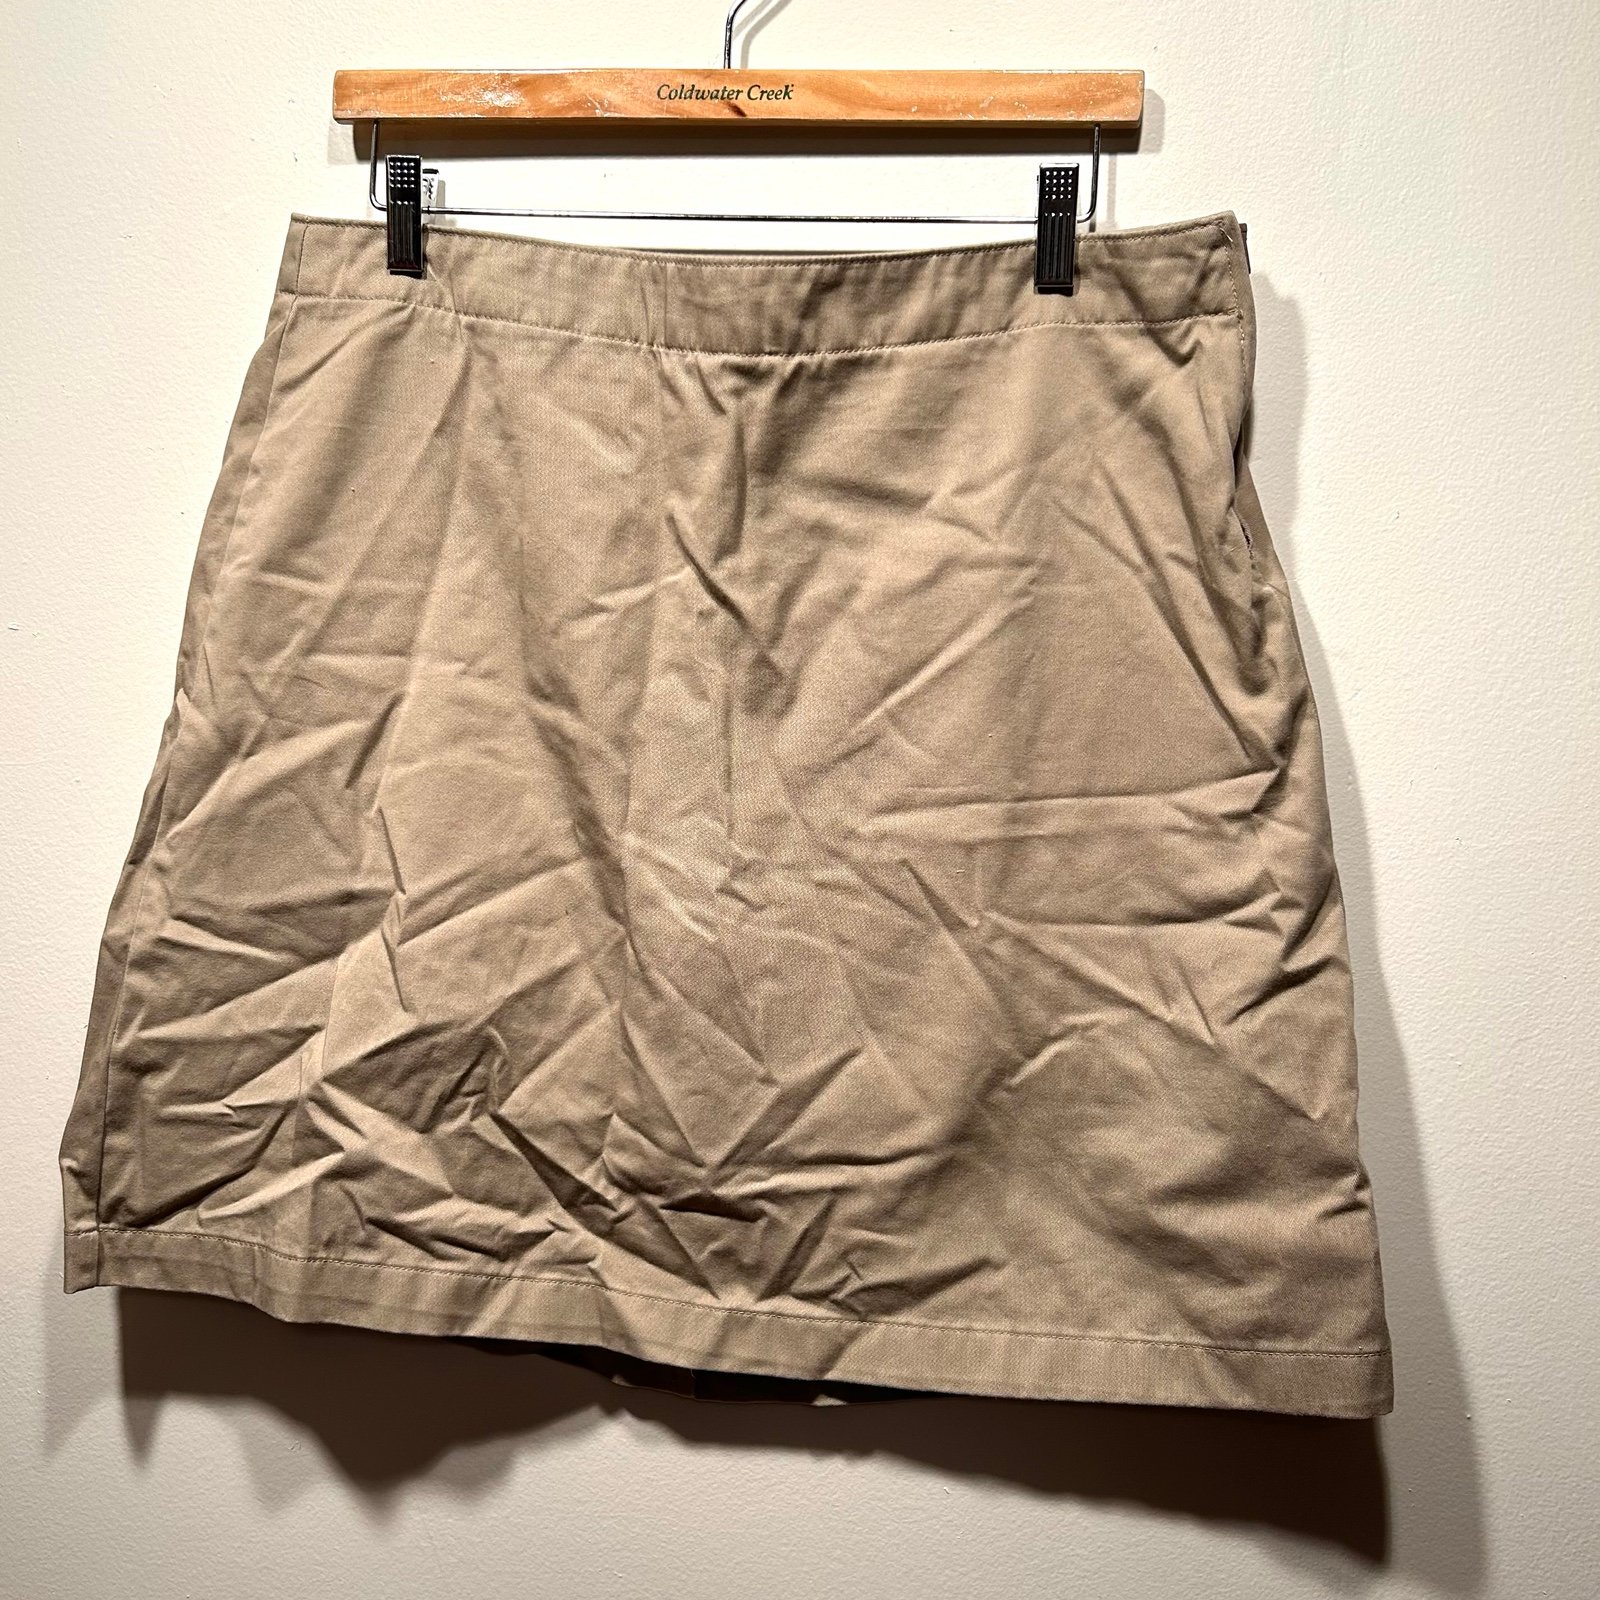 save up to 70% Lands End Khaki Skort Skirt Size 12 L Tan Cotton OhSFWNlvp Buying Cheap